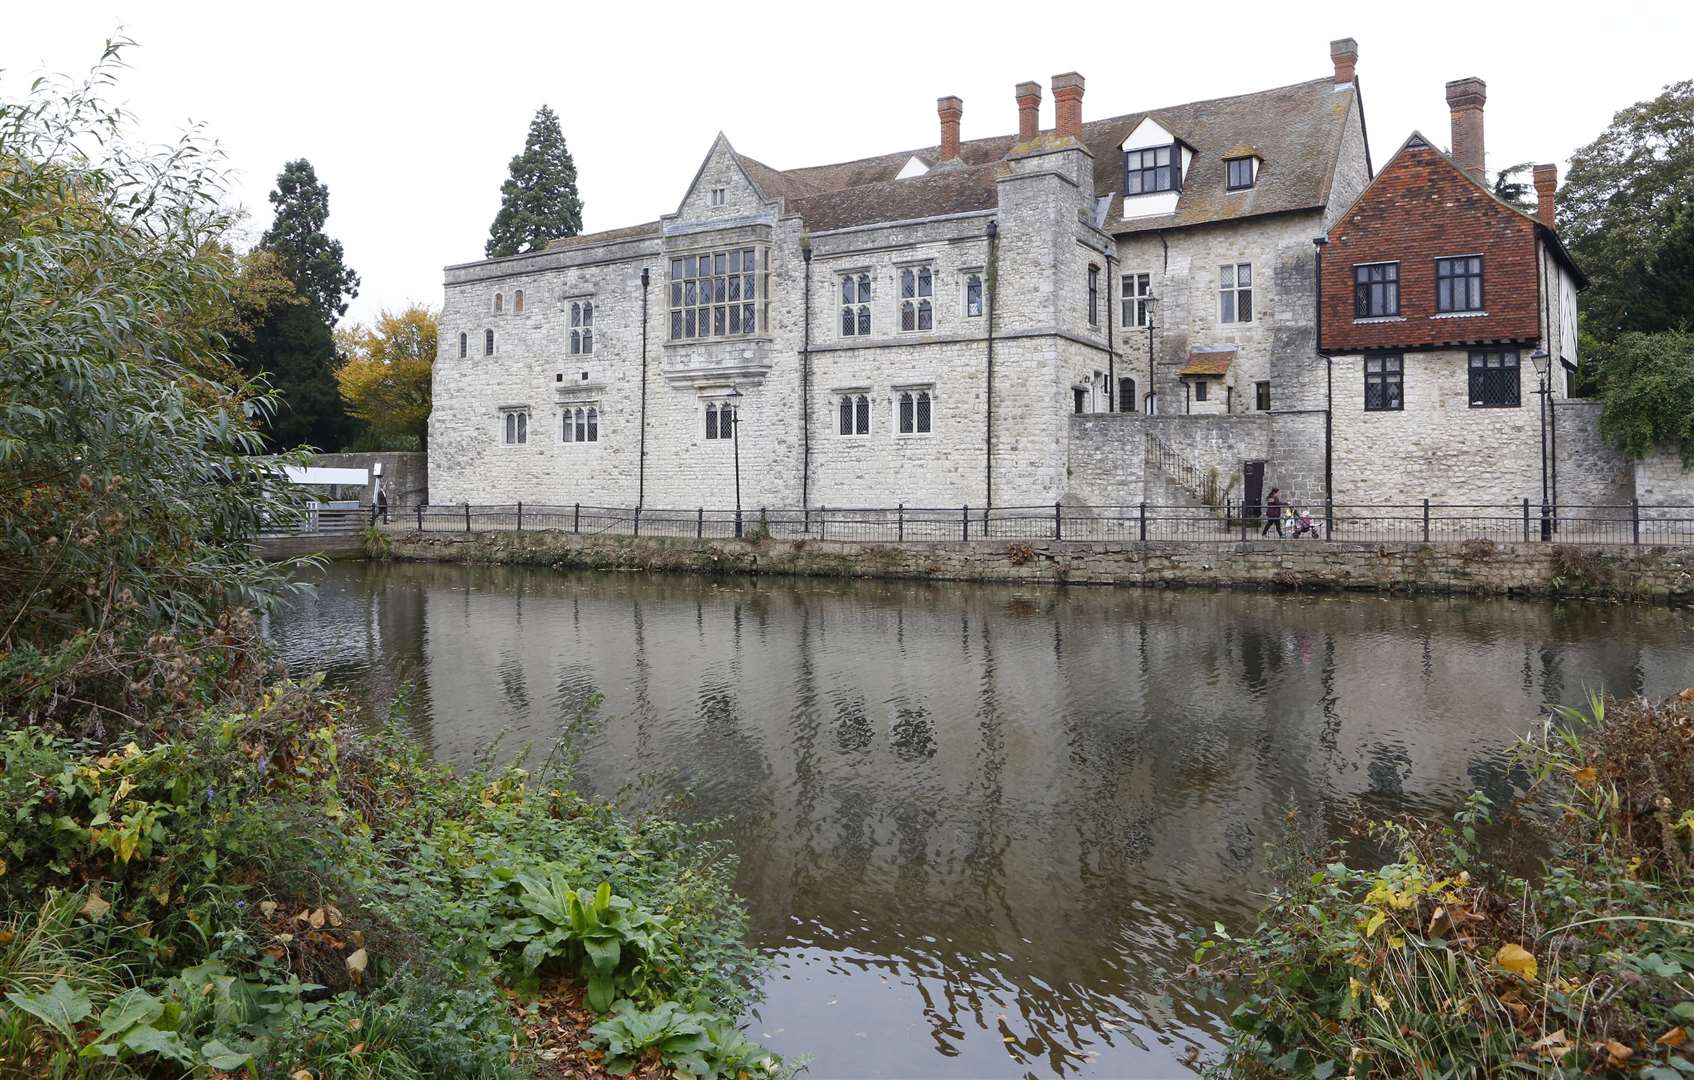 Archbishop's Palace in Maidstone